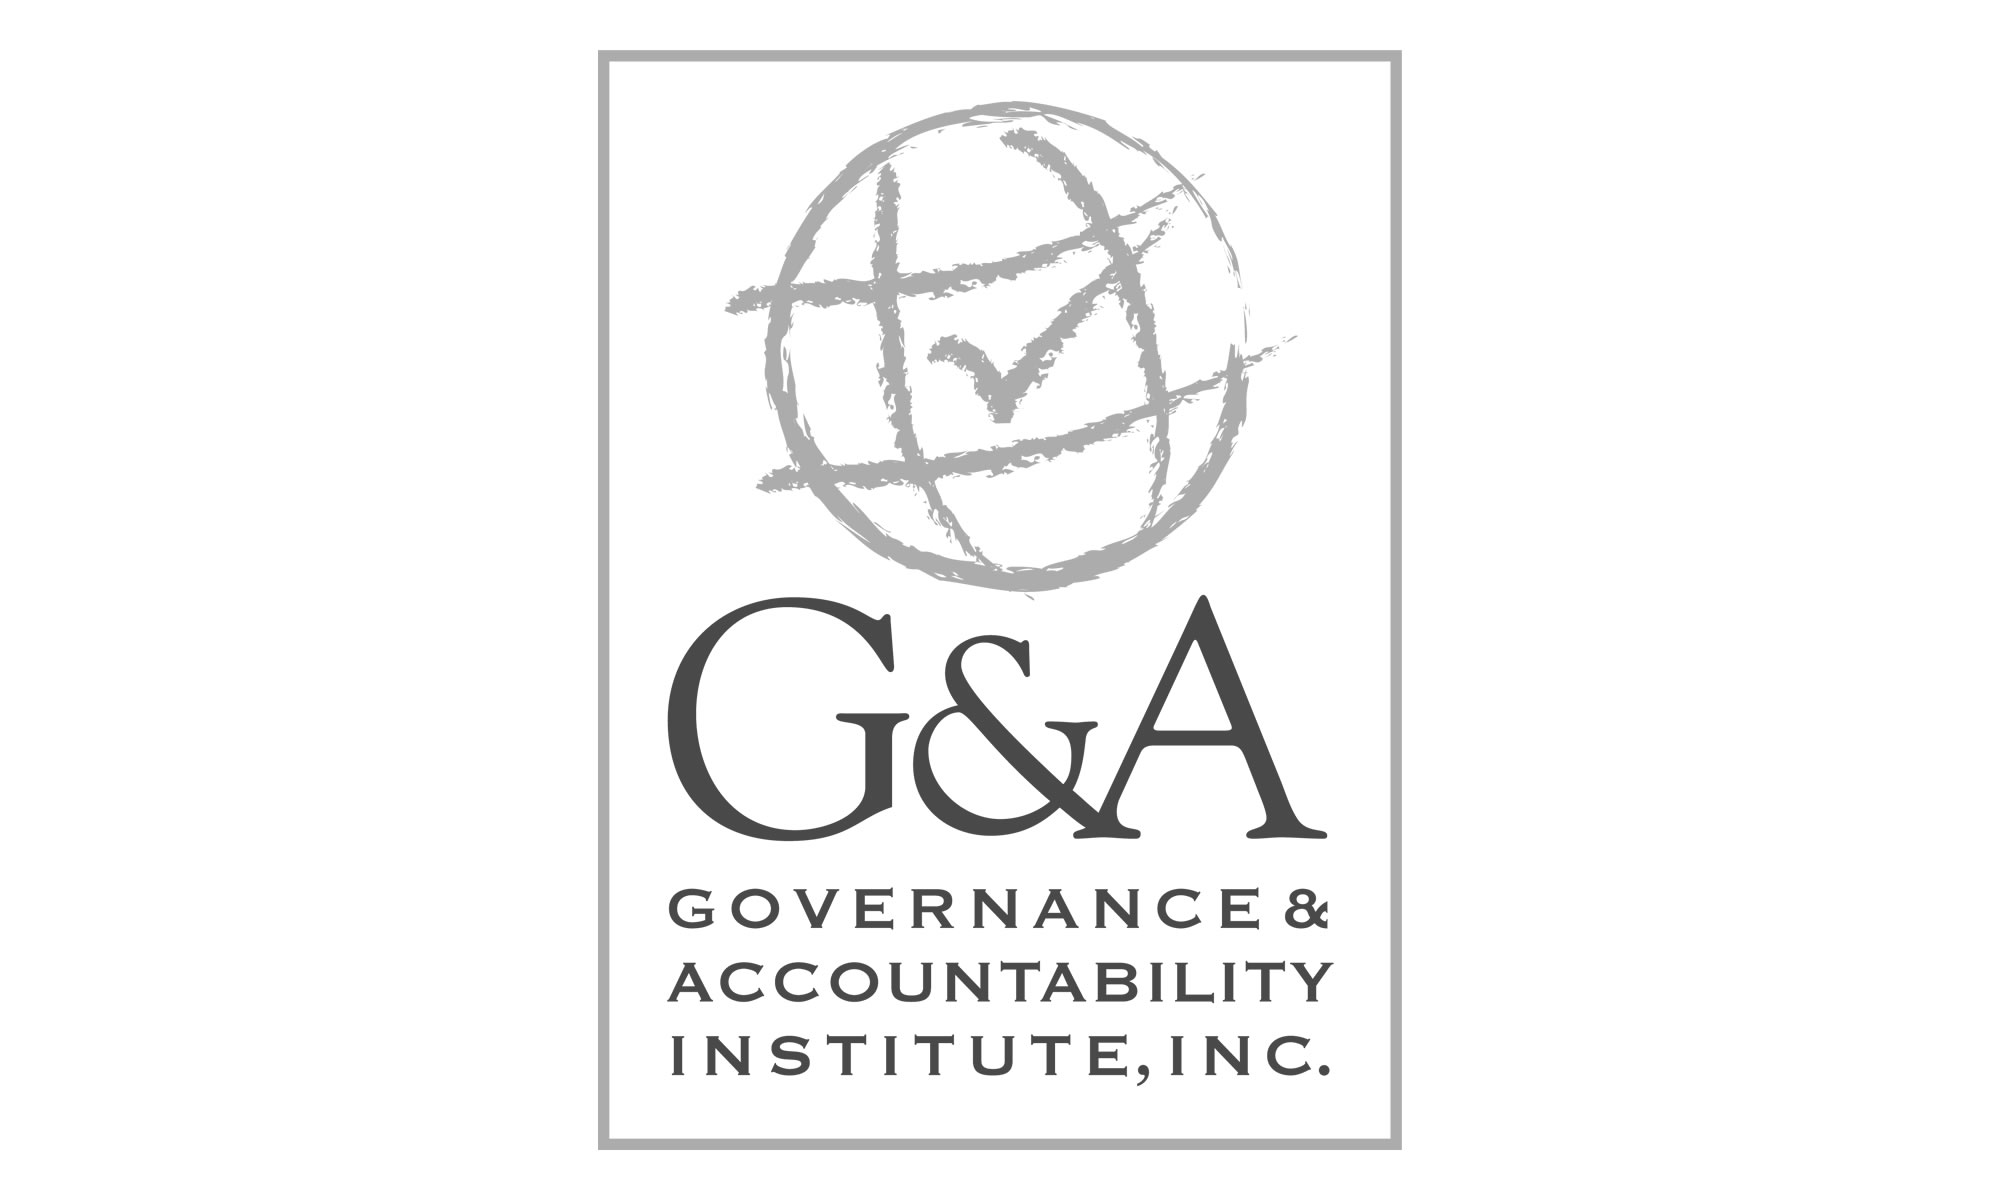 The Governance & Accountability Institute is an ESG and Sustainability consulting firm, founded in 2006, based in NYC, focused on helping clients become leaders in Corporate Sustainability, Responsibility, Citizenship -- including the full breadth of Environmental, Social and Corporate Governance (ESG) issues